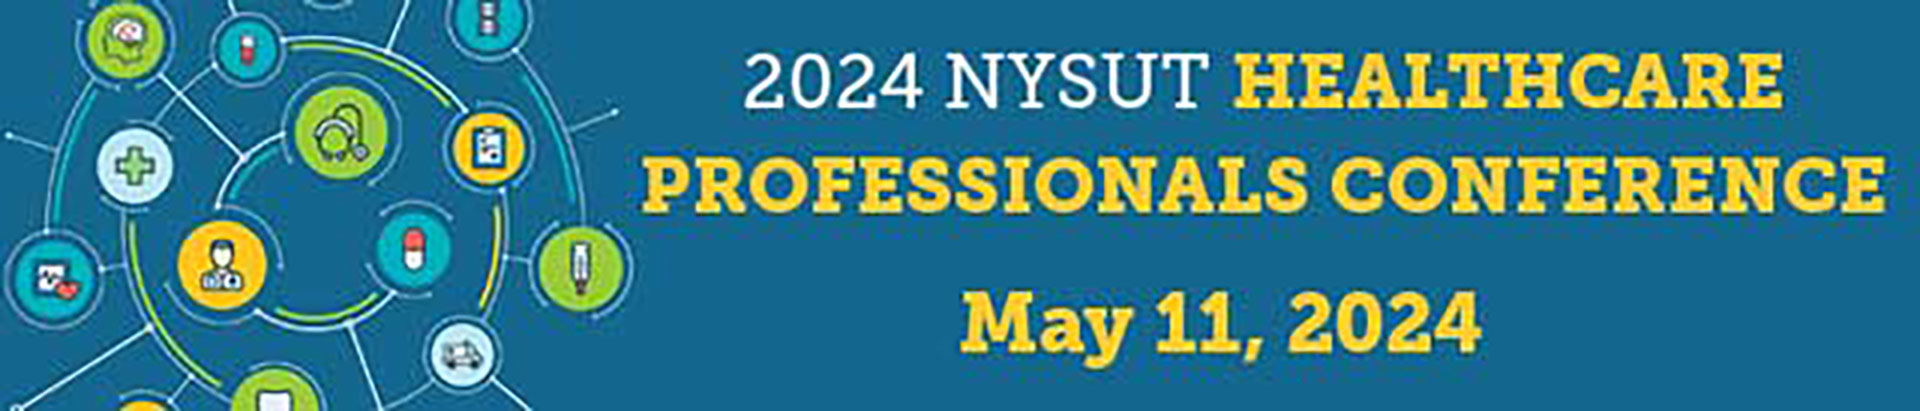 2024 NYSUT Healthcare Professionals Conference